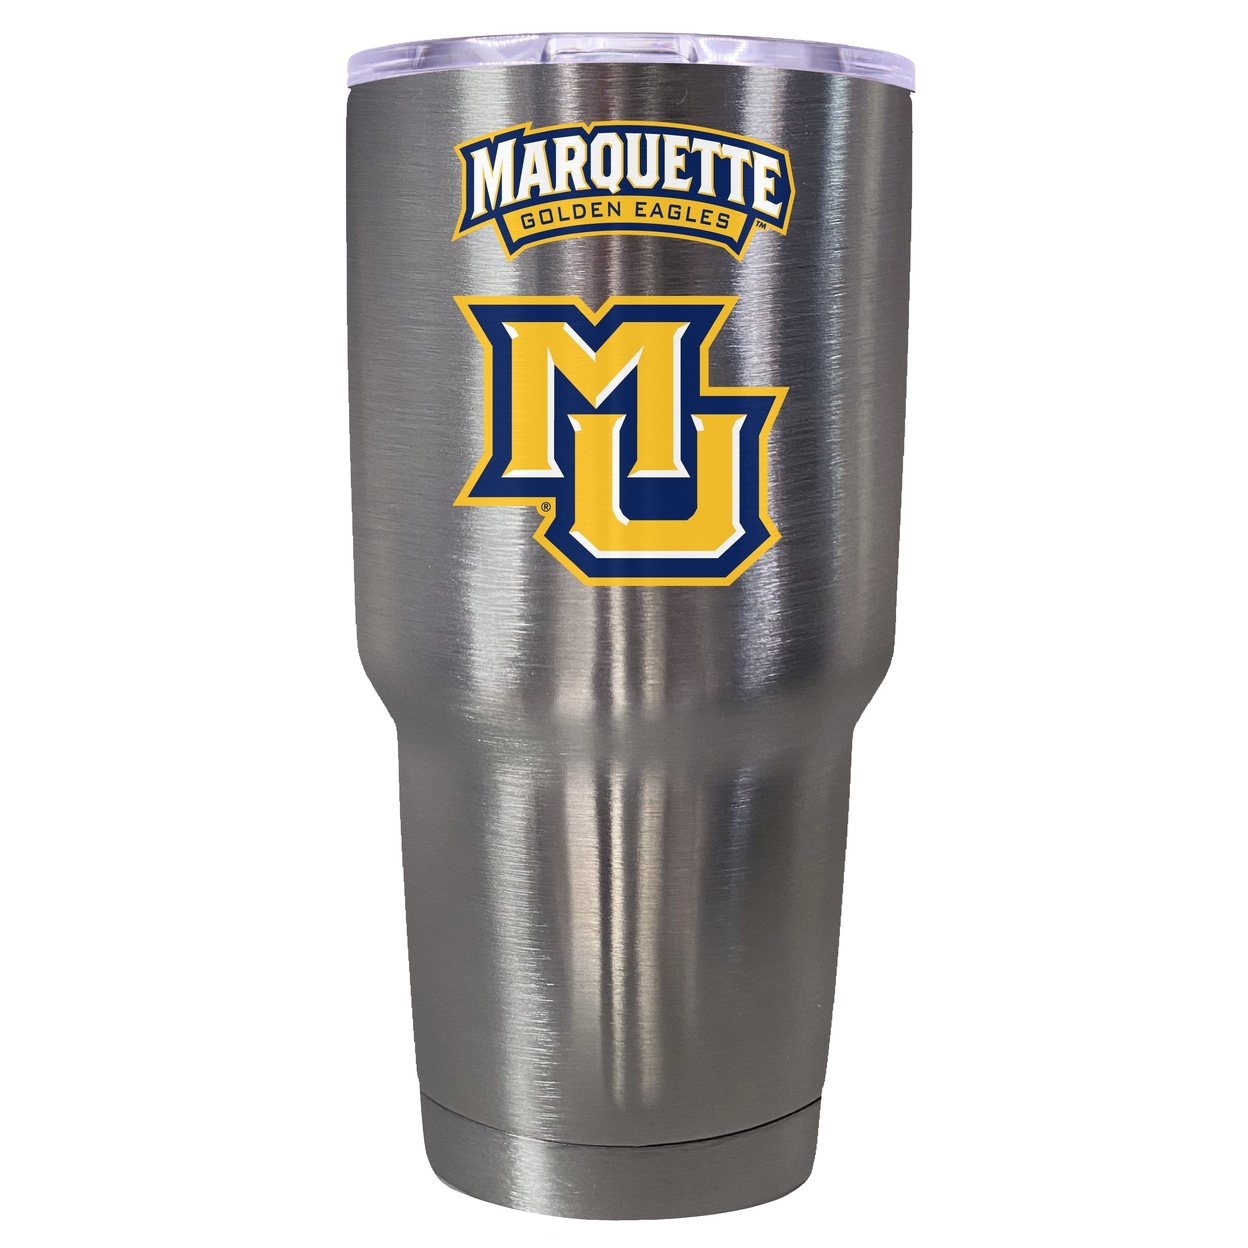 Marquette Golden Eagles 24 Oz Insulated Stainless Steel Tumbler